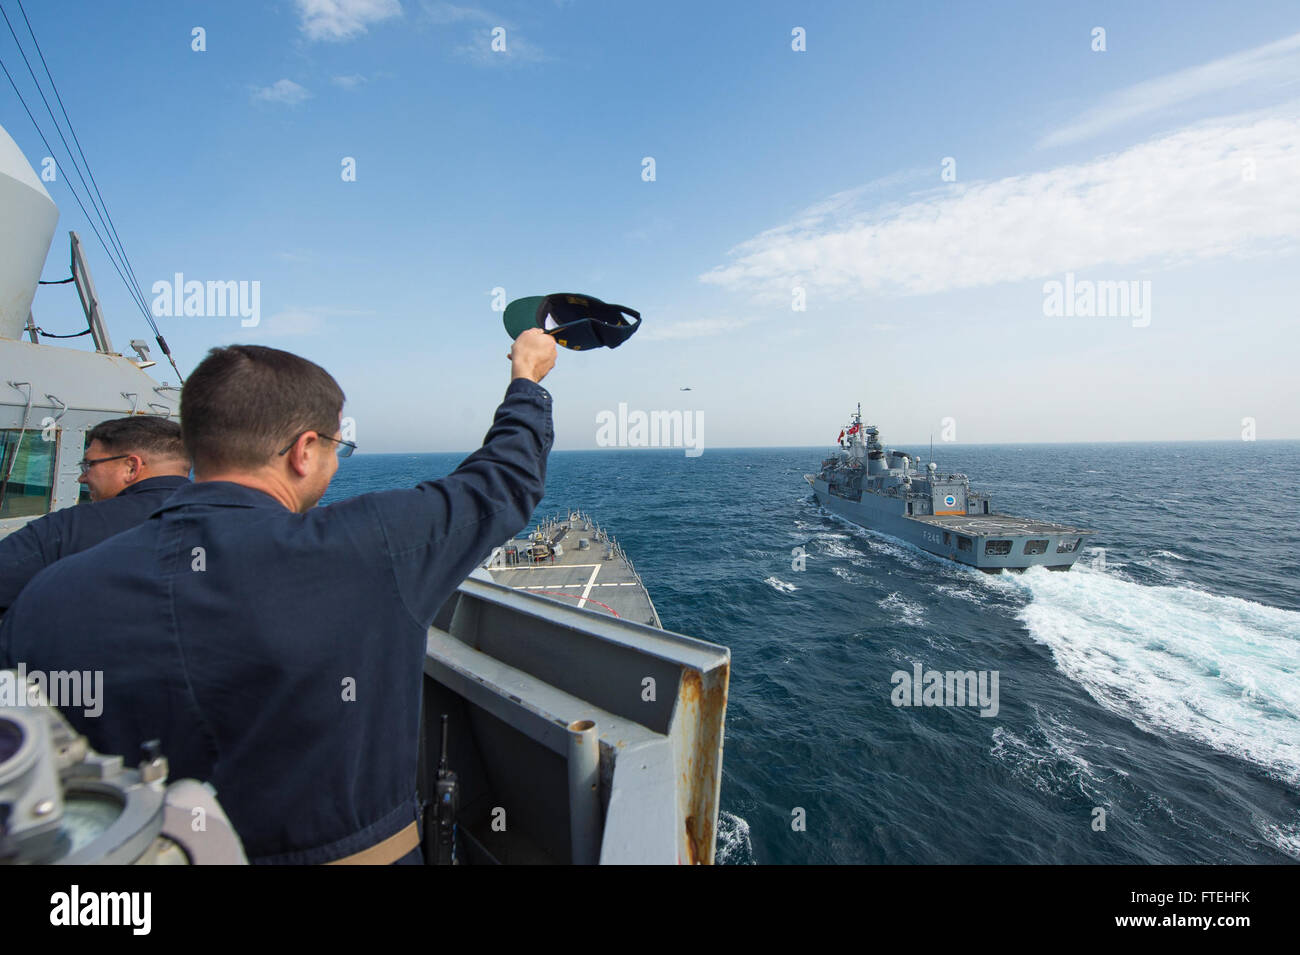 aboard the Arleigh Burke-class guided-missile destroyer USS Cole (DDG 67) waves good-bye to the Turkish navy Barbaros-class frigate TCG Salihreis (F 246) during a passing exercise. Cole, homeported in Norfolk, Va., is conducting naval operations in the U.S. 6th Fleet area of operations in support of U.S. national security interests in Europe. Stock Photo